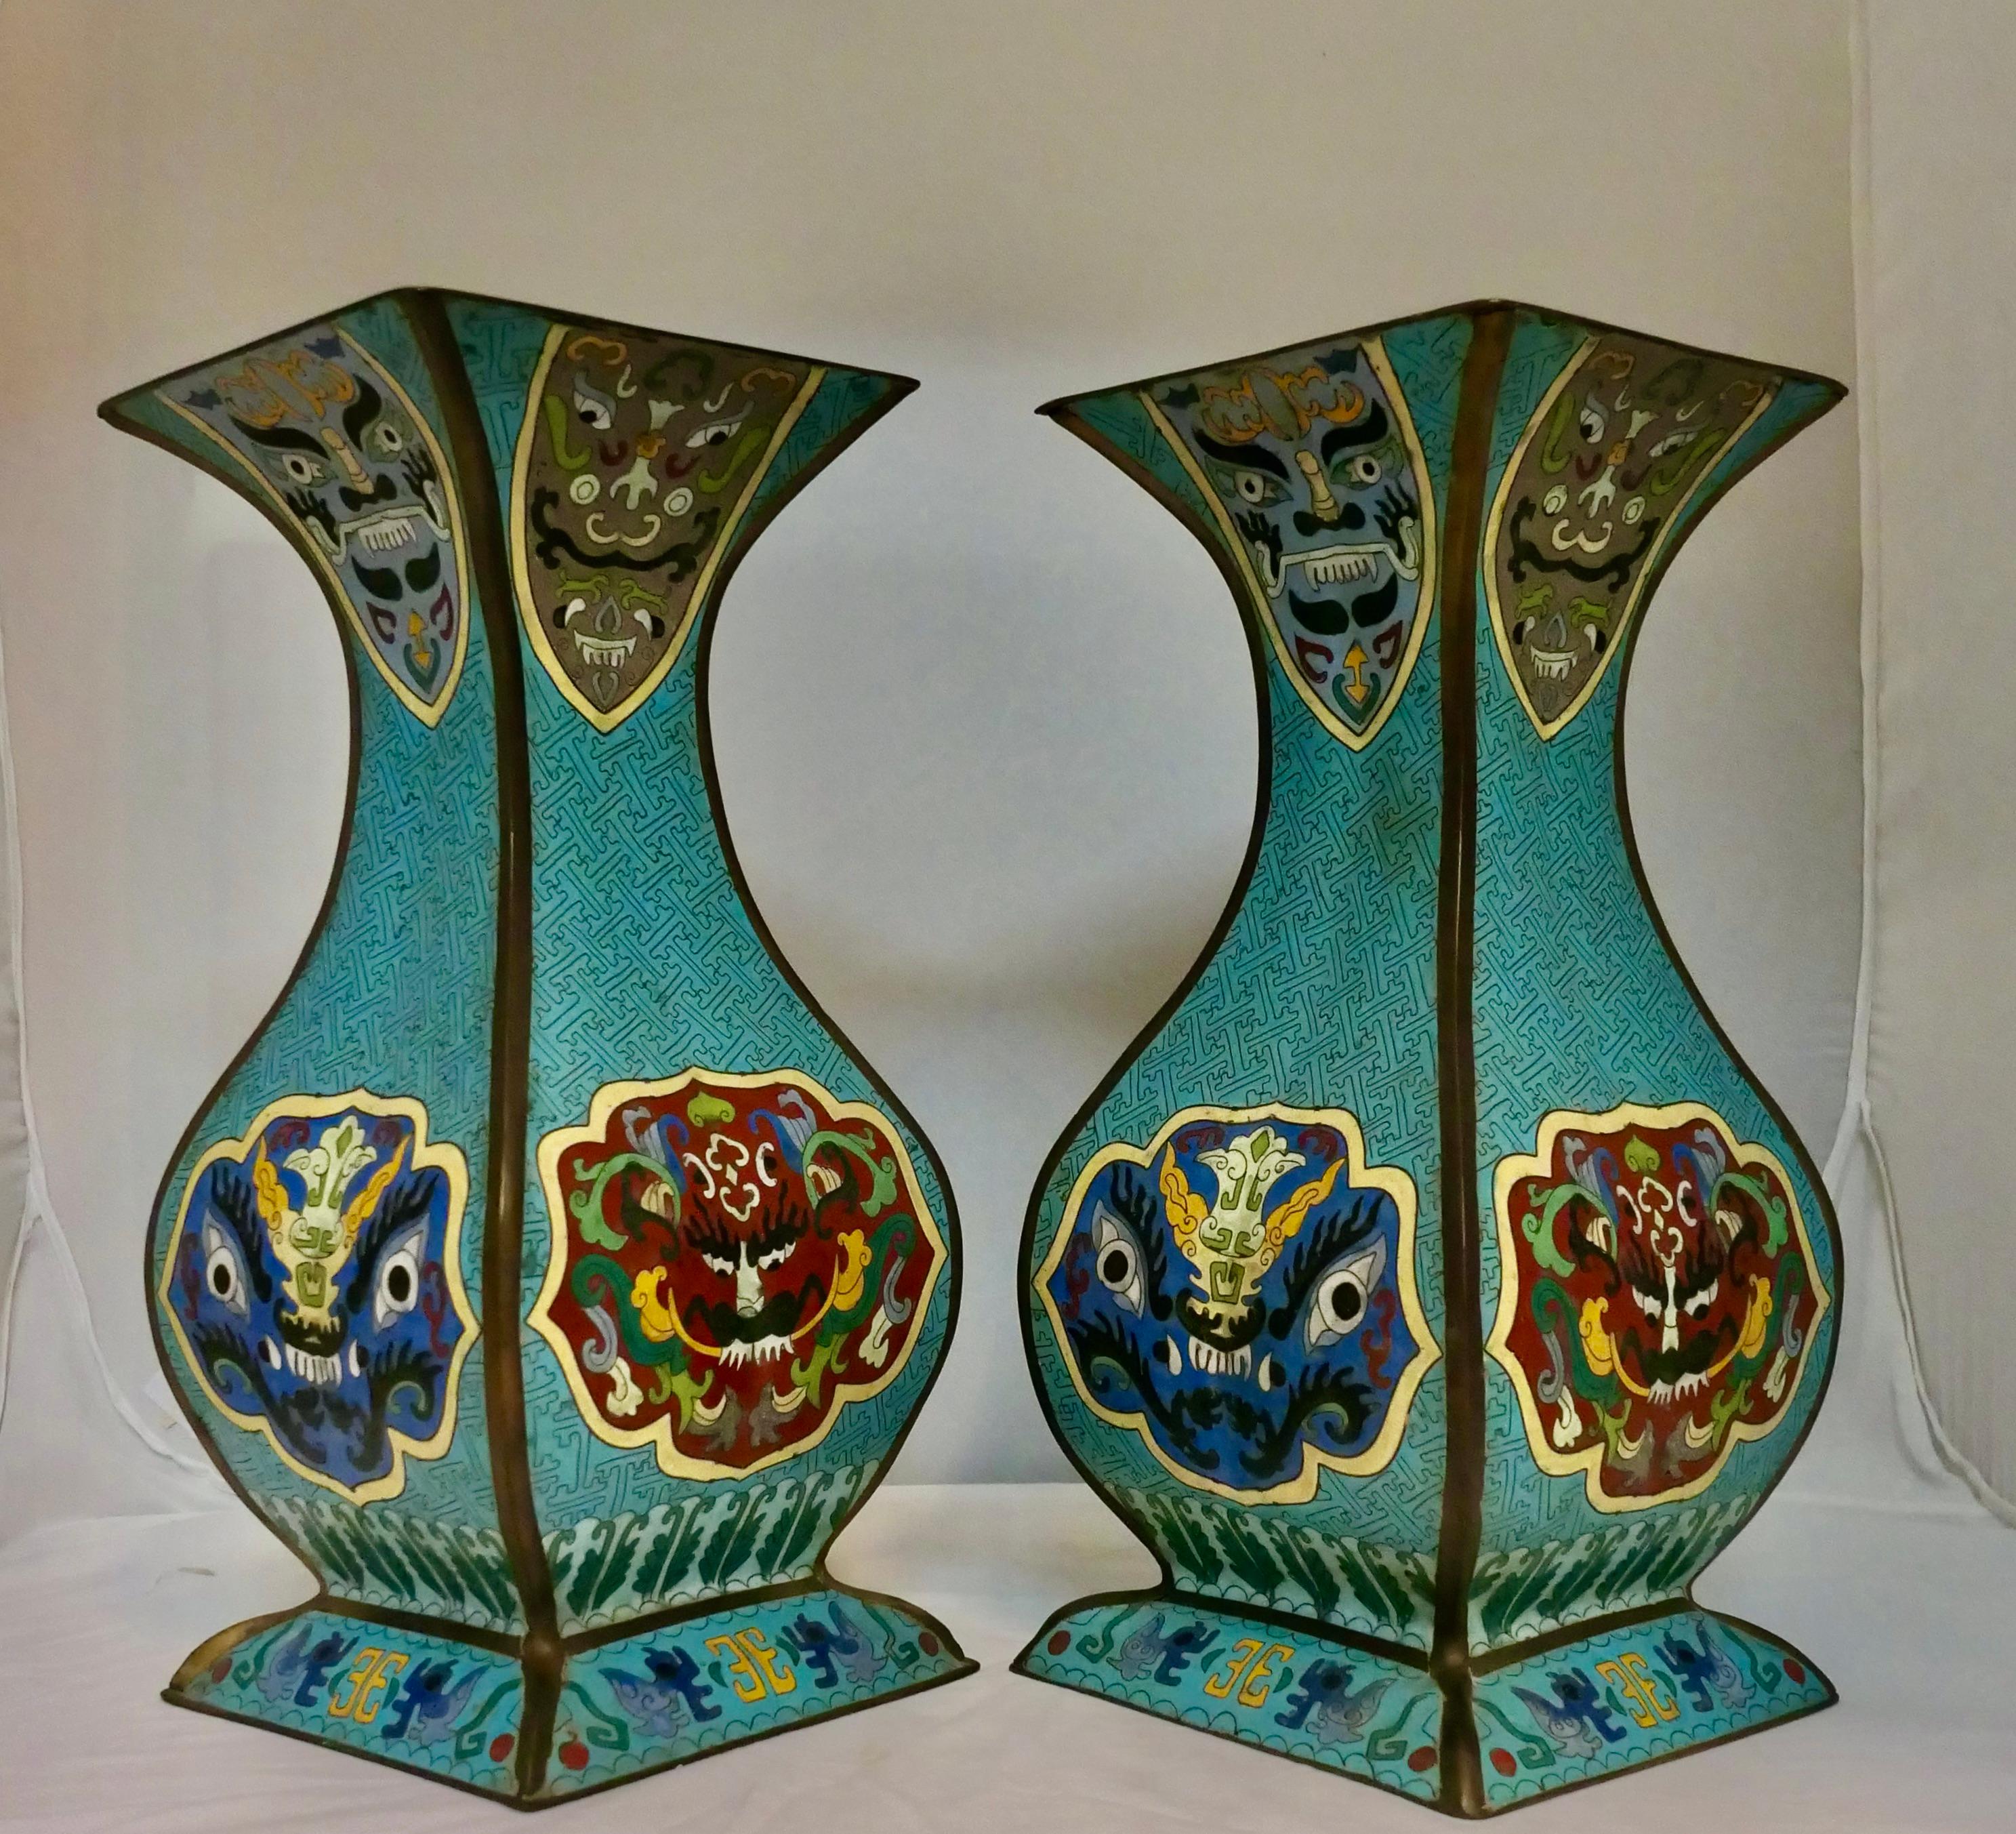 This pair of early 20th century Japanese hand decorated cloisonné’ vases are uniquely designed with a four panel curved body accented by an extended skirted base. Each vase is decorated with stunning blue backgrounds with stylish wire patterns.